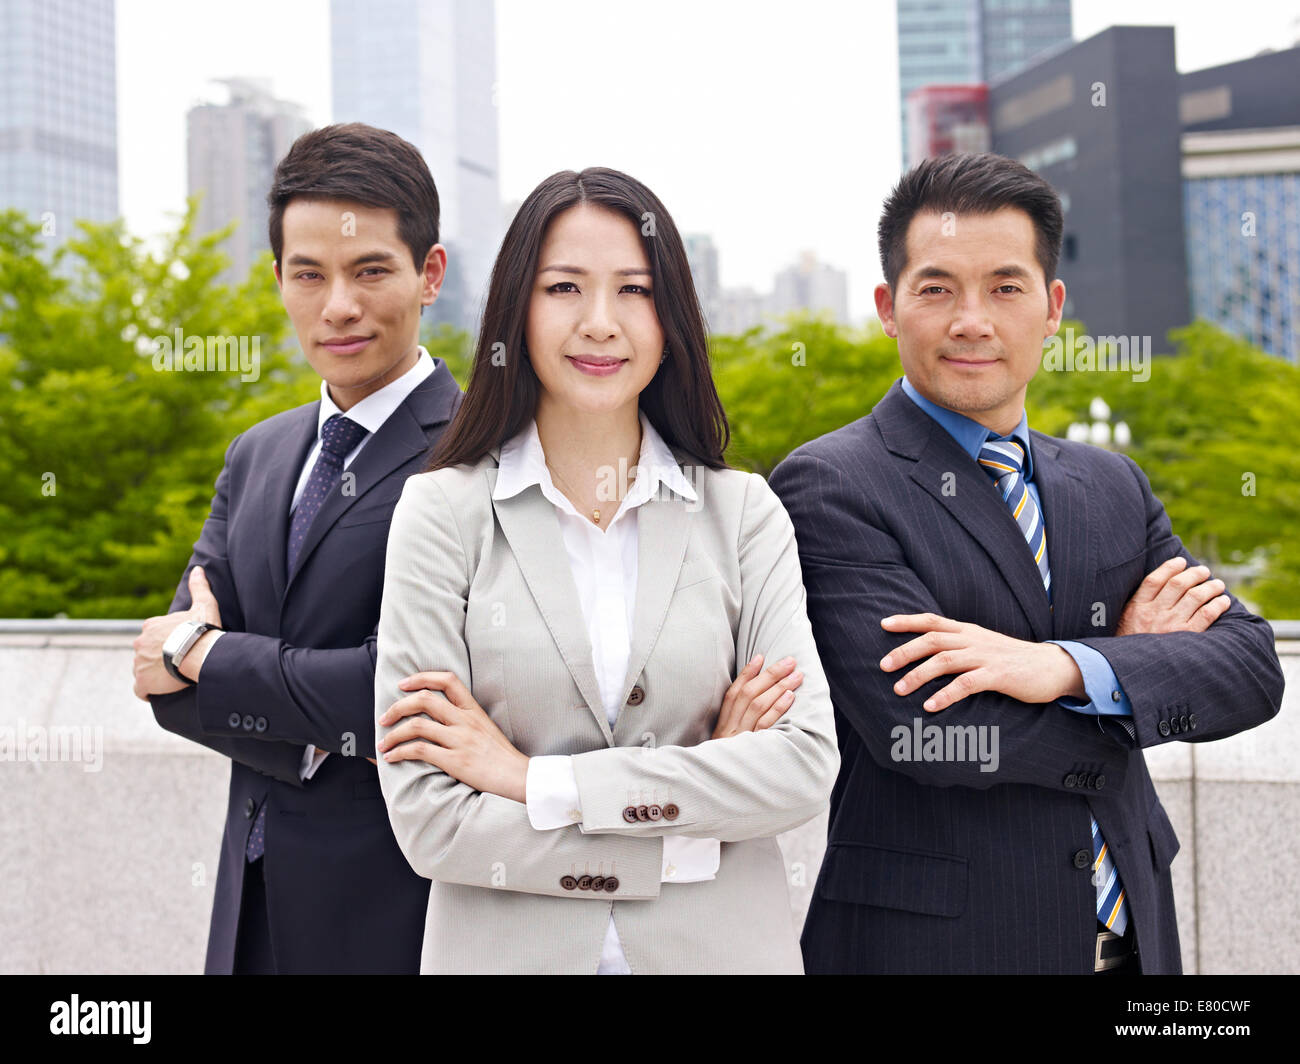 outdoor portrait of an asian business team. Stock Photo